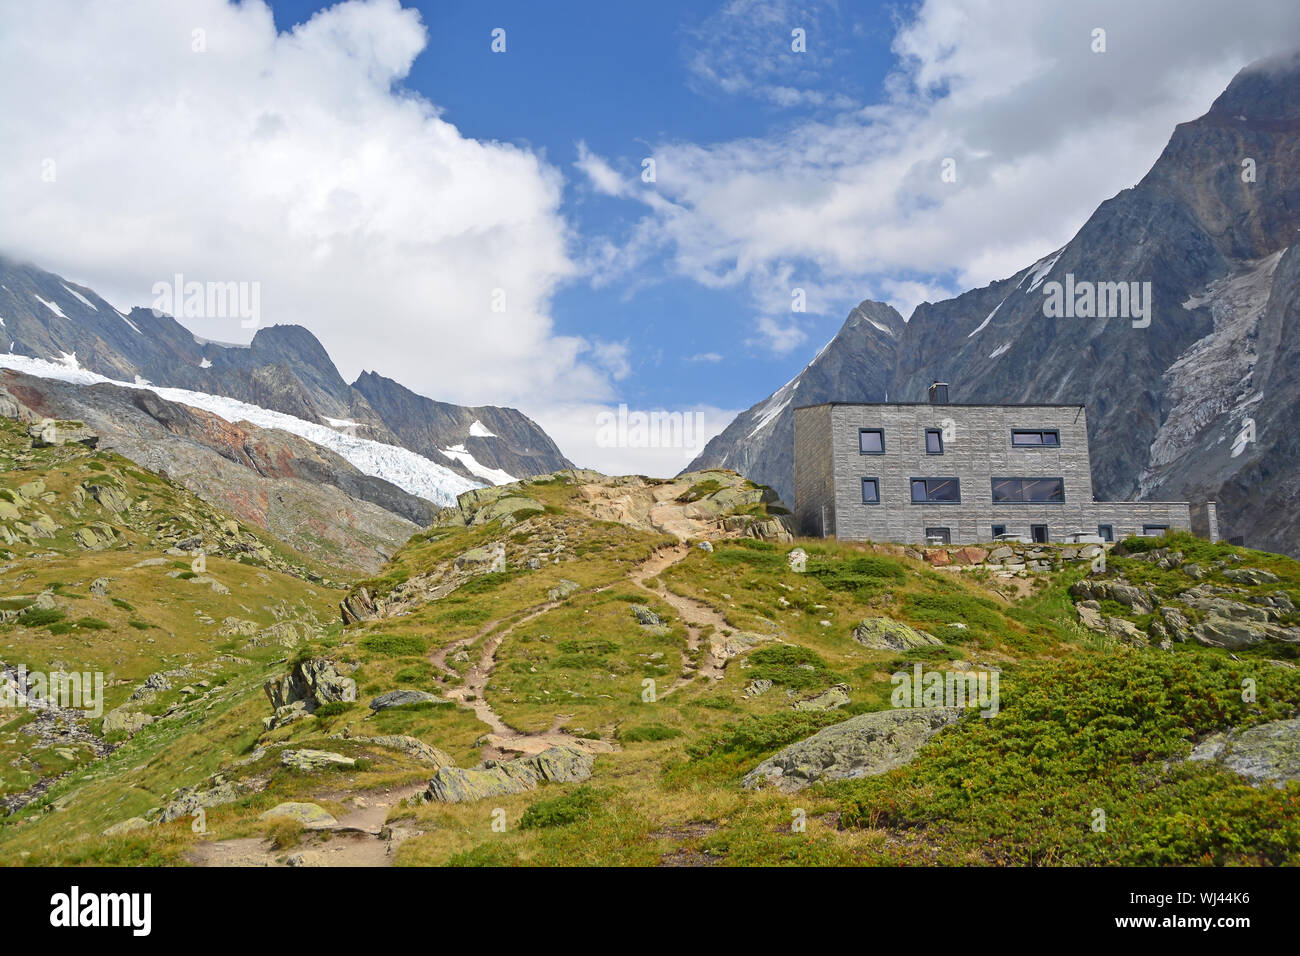 The modern Annenhutte mountain refuge at the head of the Lotschtal in the Swiss Bernese Alps. Stock Photo